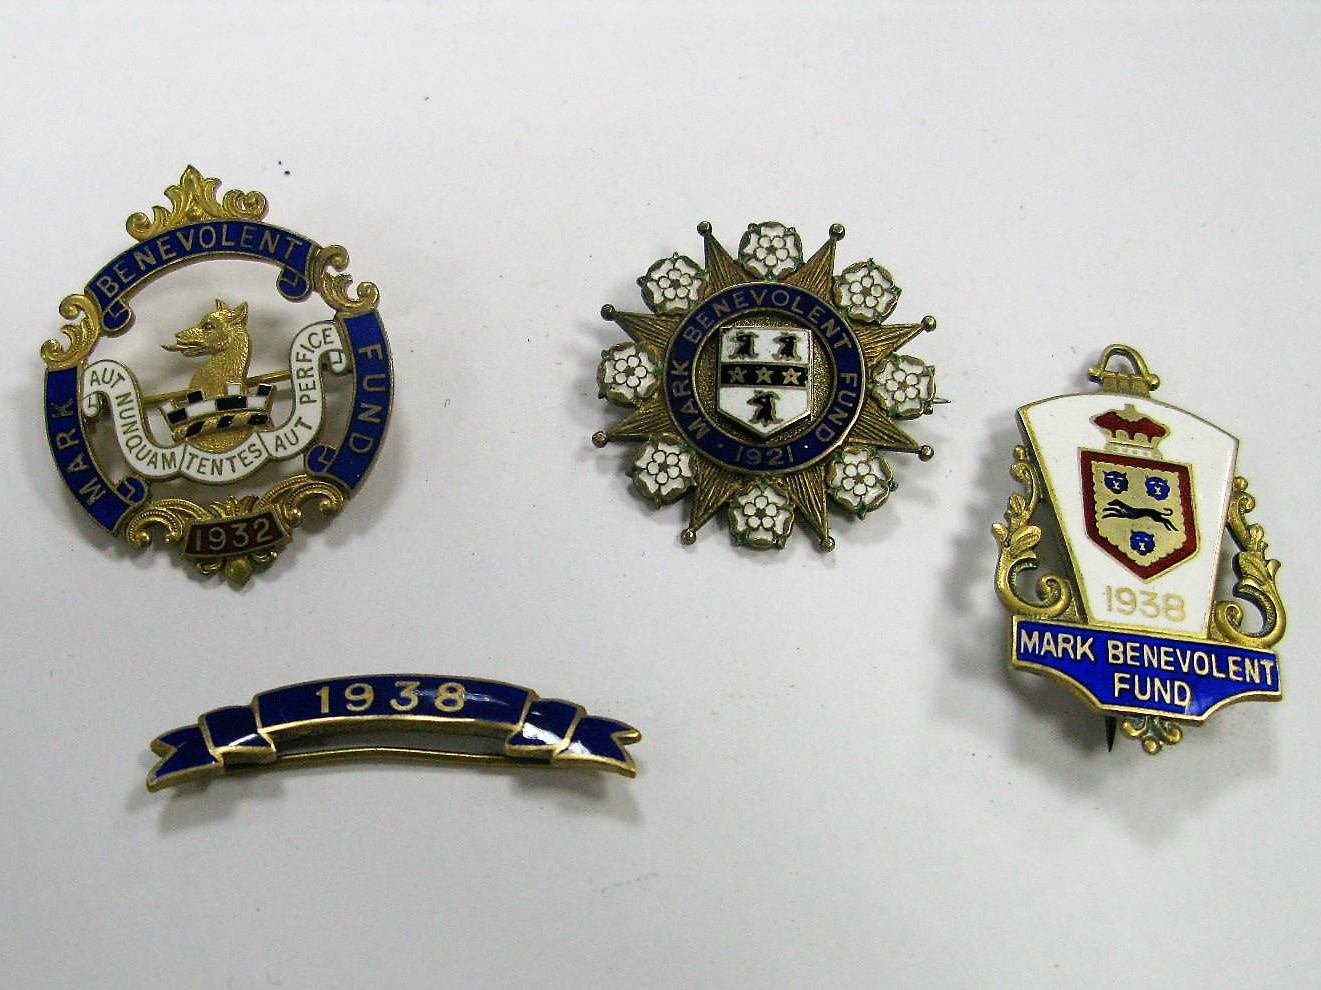 Four Silver Gilt and Enamelled (Masonic?) Medallions, dated from 1921 to 1938, (three marked "Mark